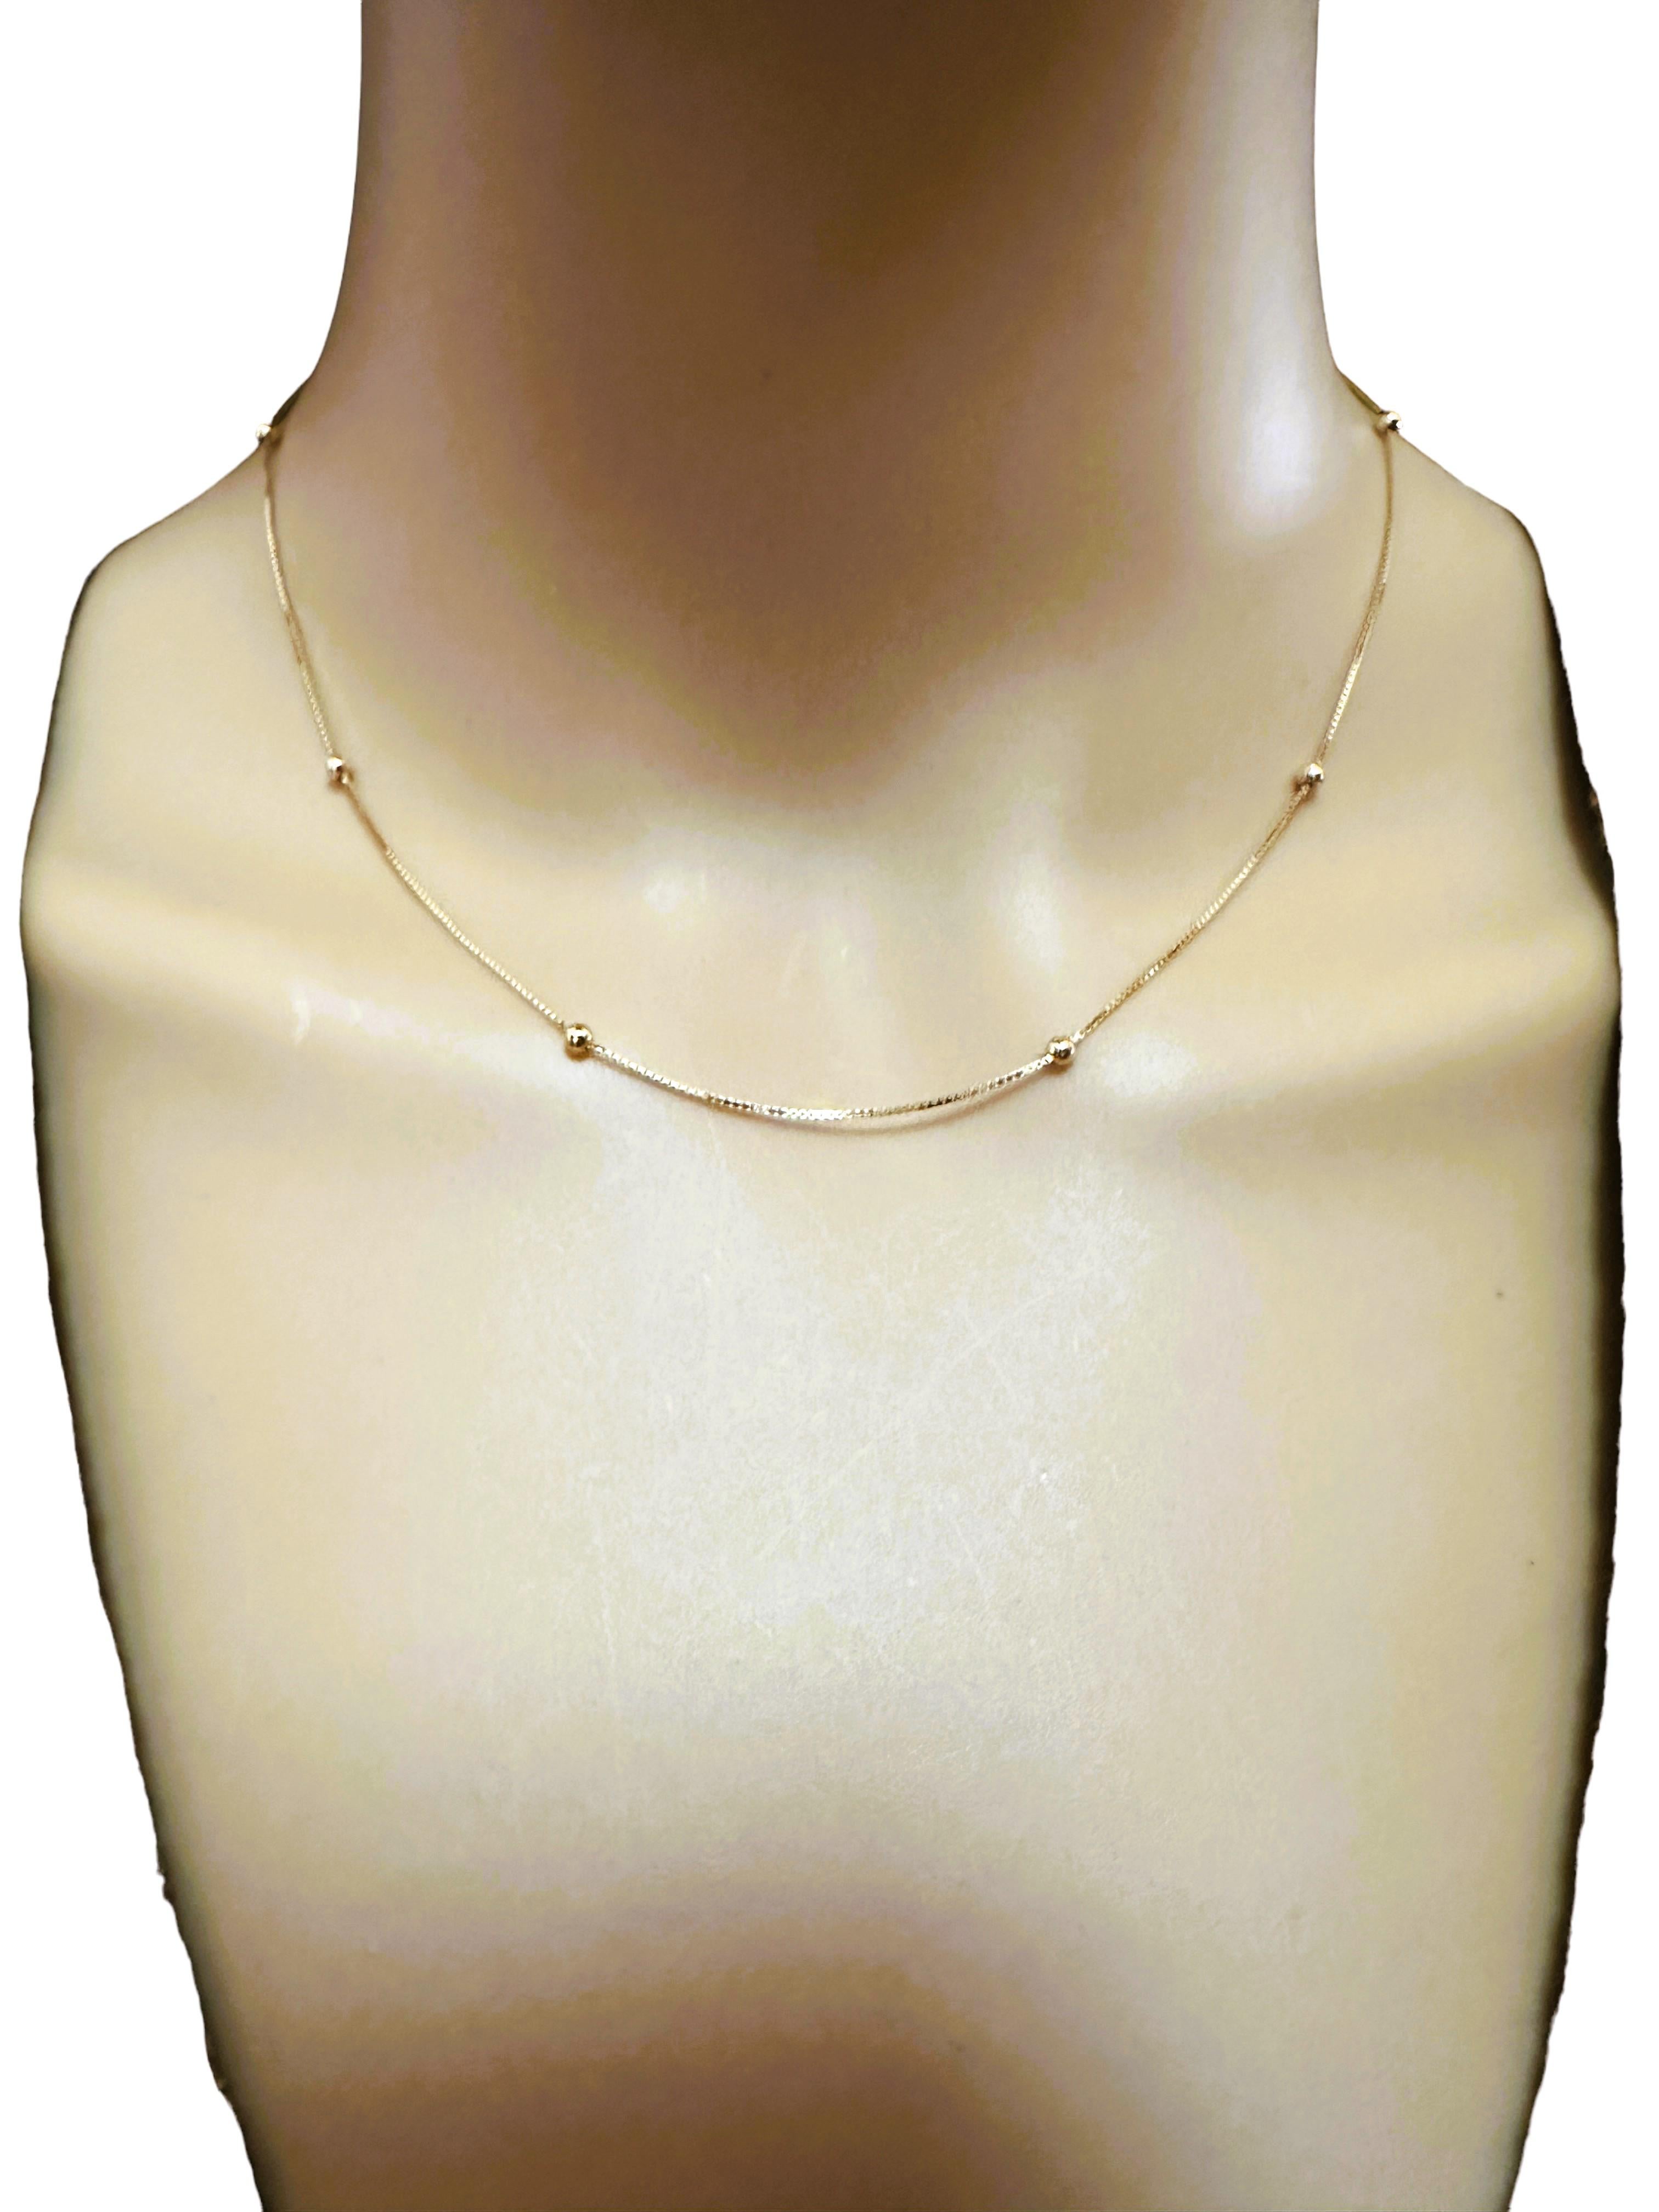 Art Nouveau 14k Yellow Gold Italian Necklace with Spaced Beads - 16